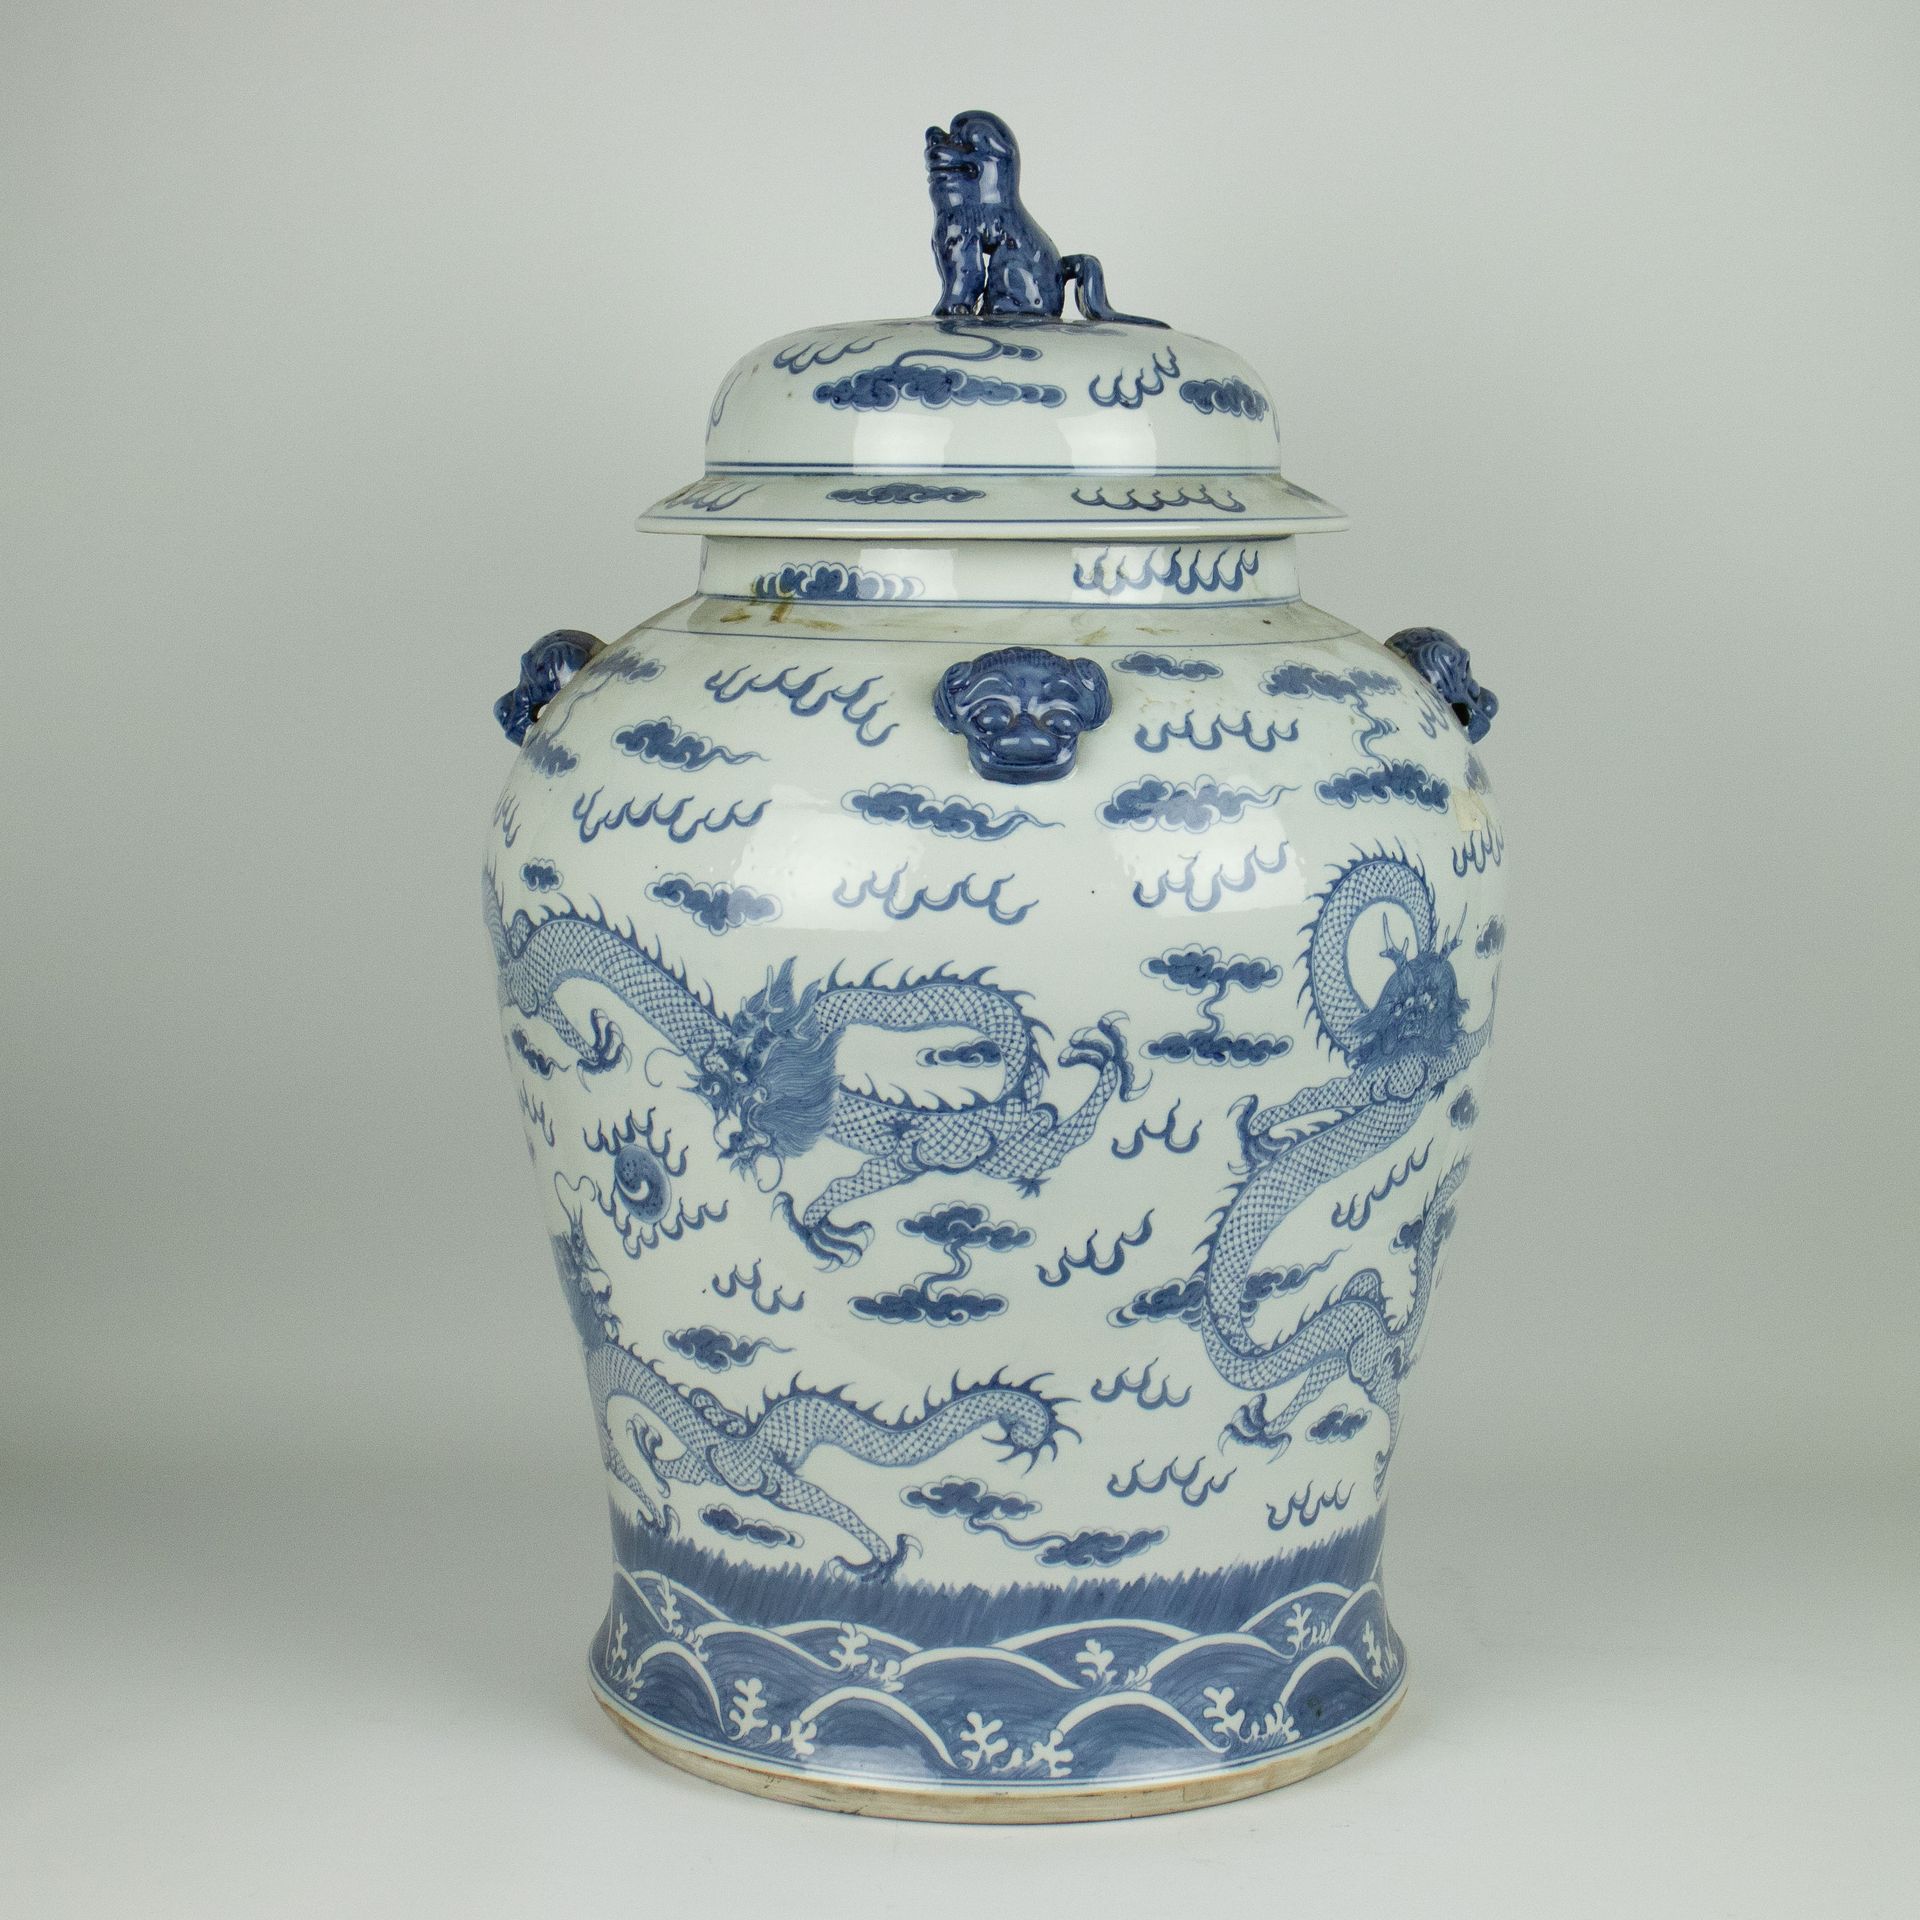 A lidded Chinese vase blue white Decor with Foo dog and with dragons. Blauw witt&hellip;